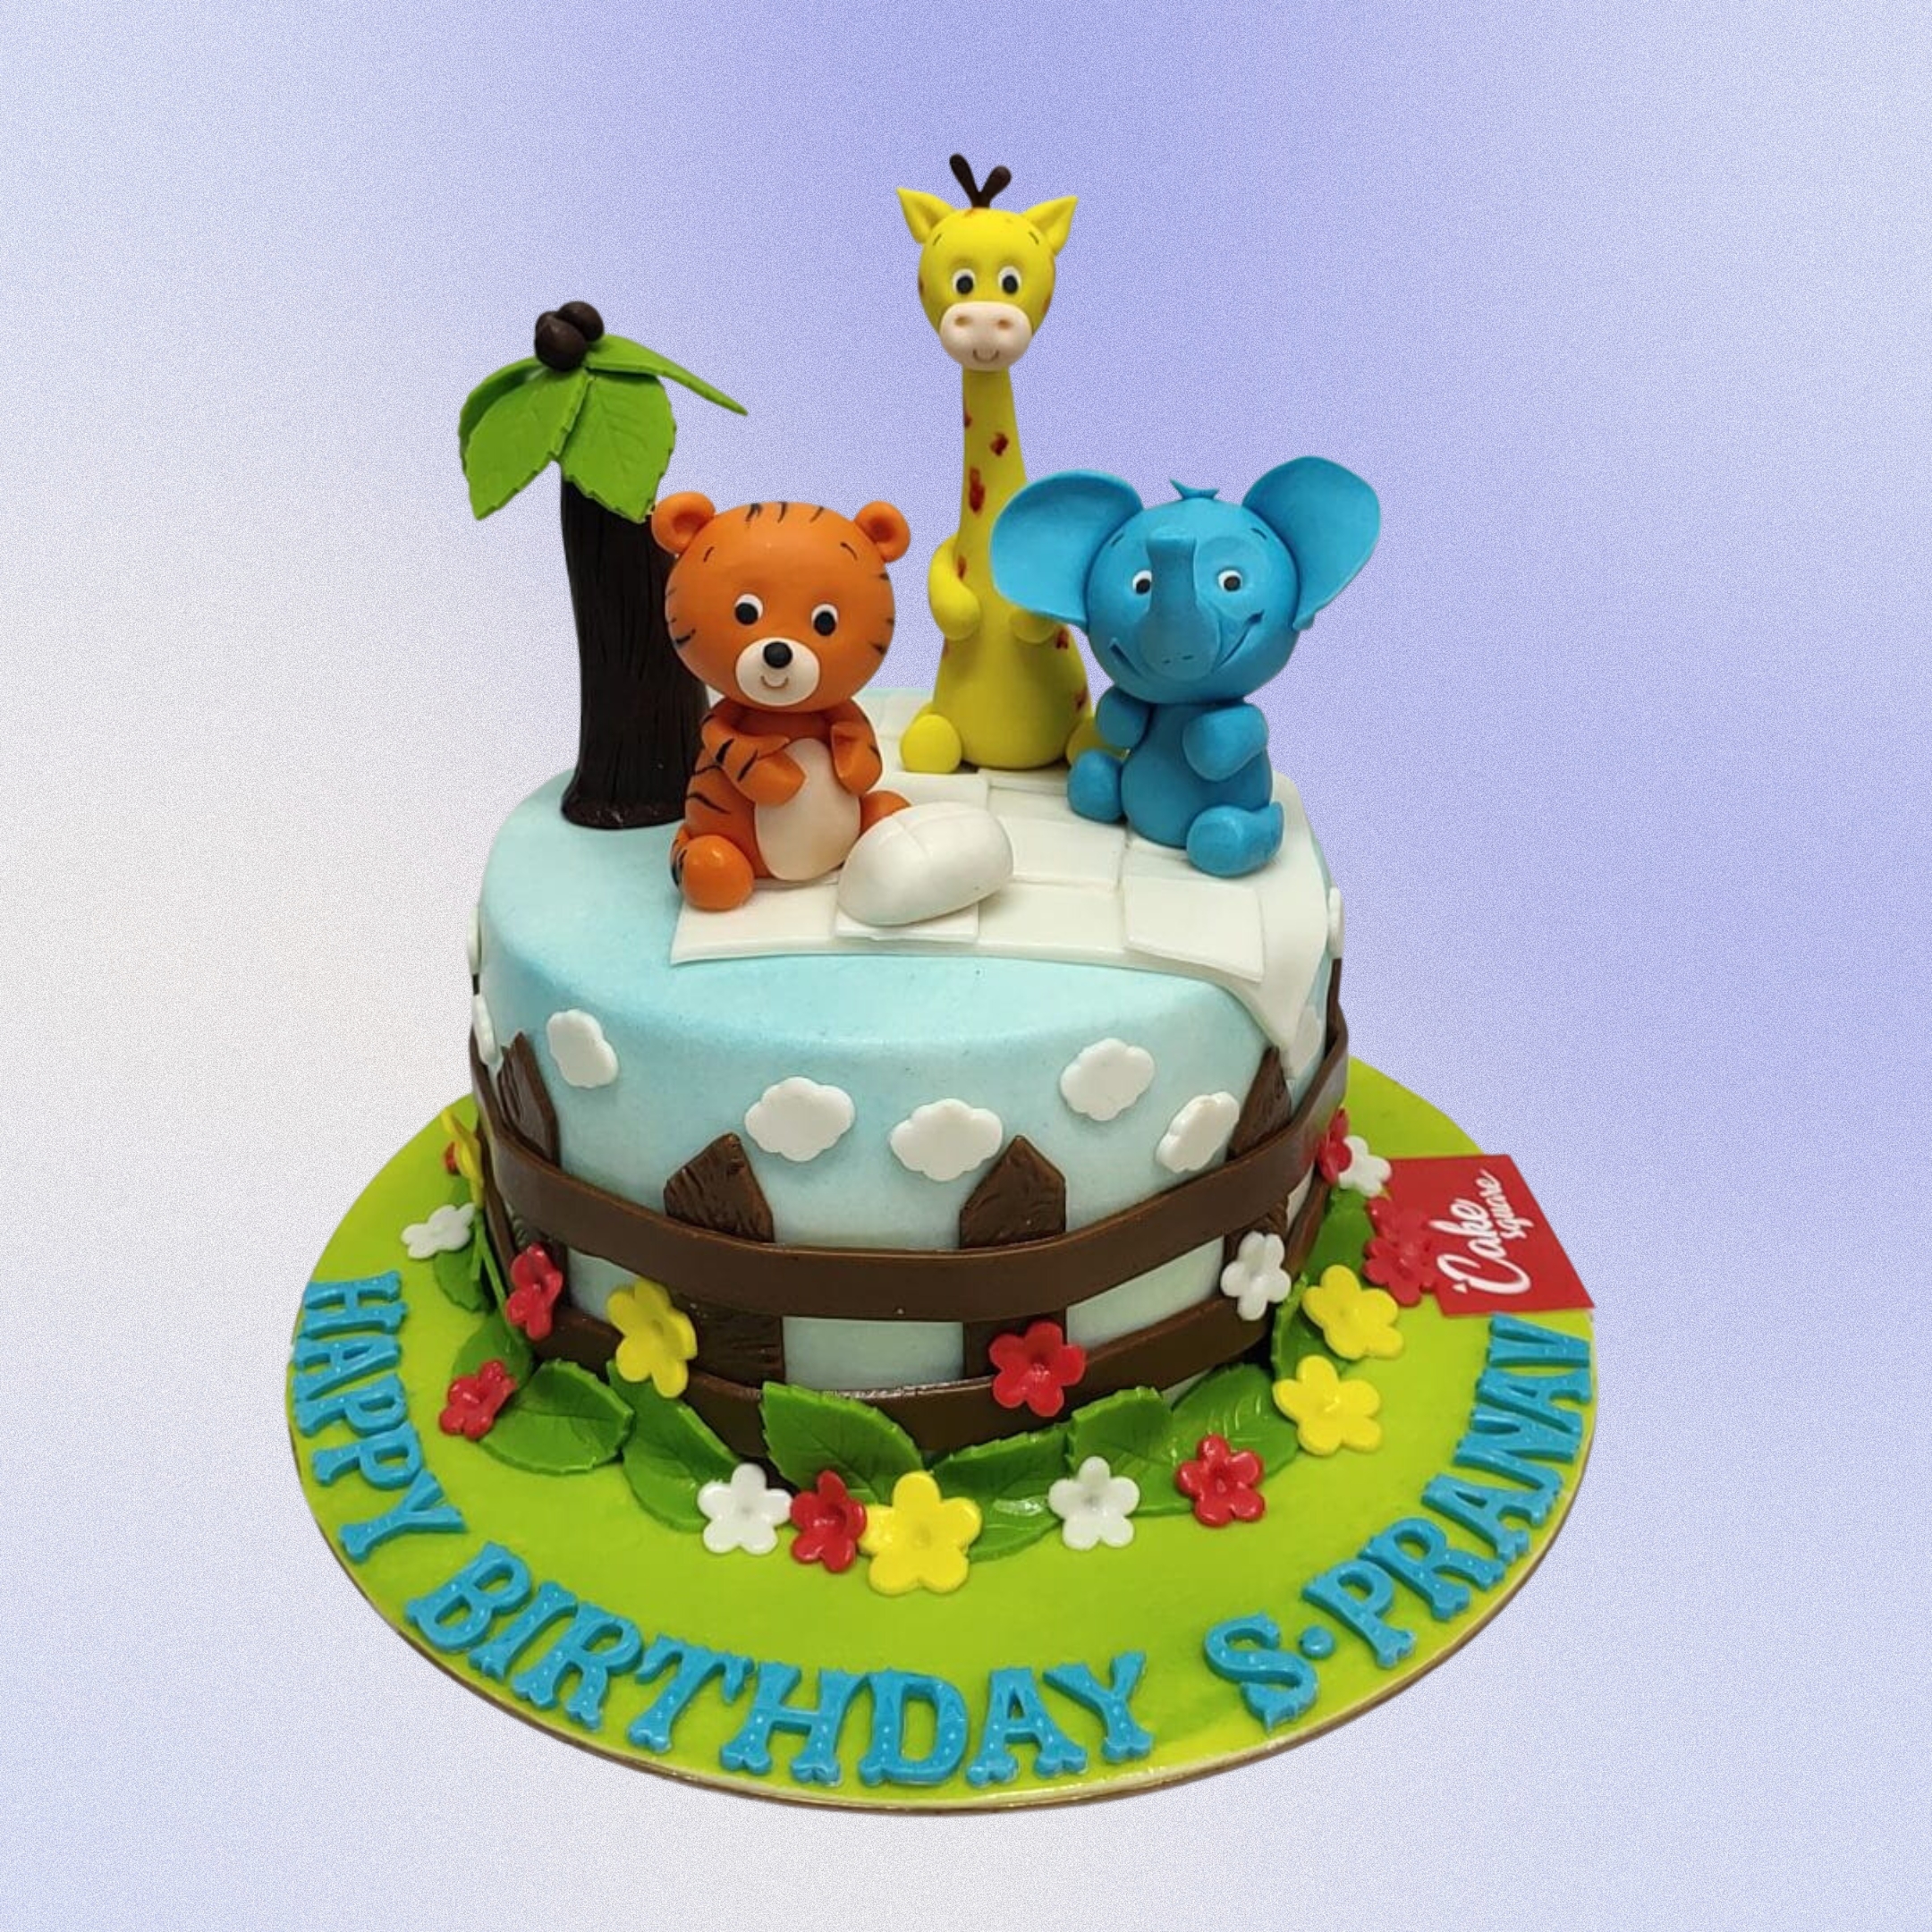 Share more than 194 childrens birthday cakes super hot